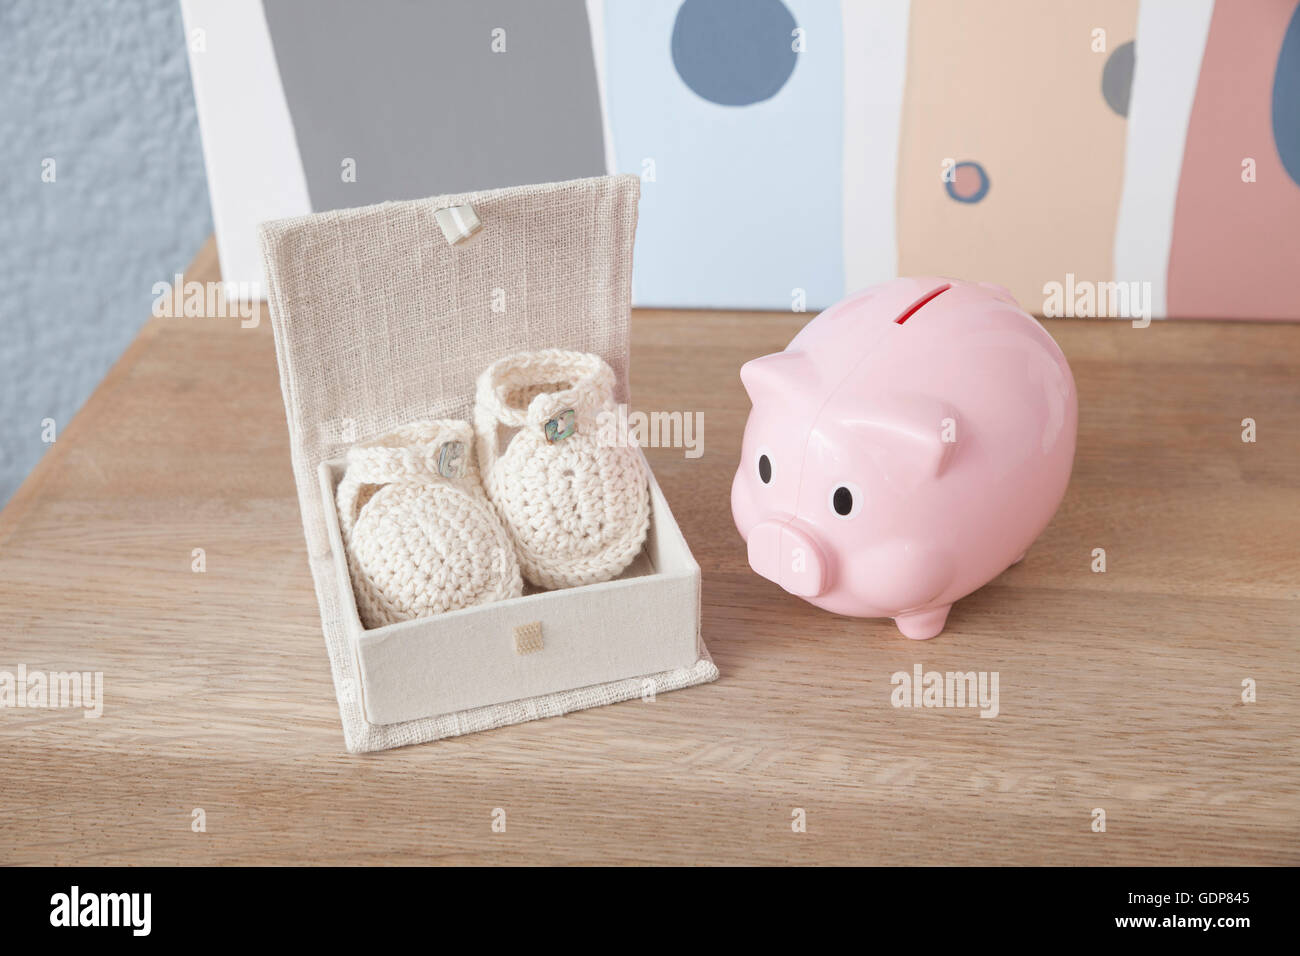 Baby shoes and piggy bank, close-up Stock Photo